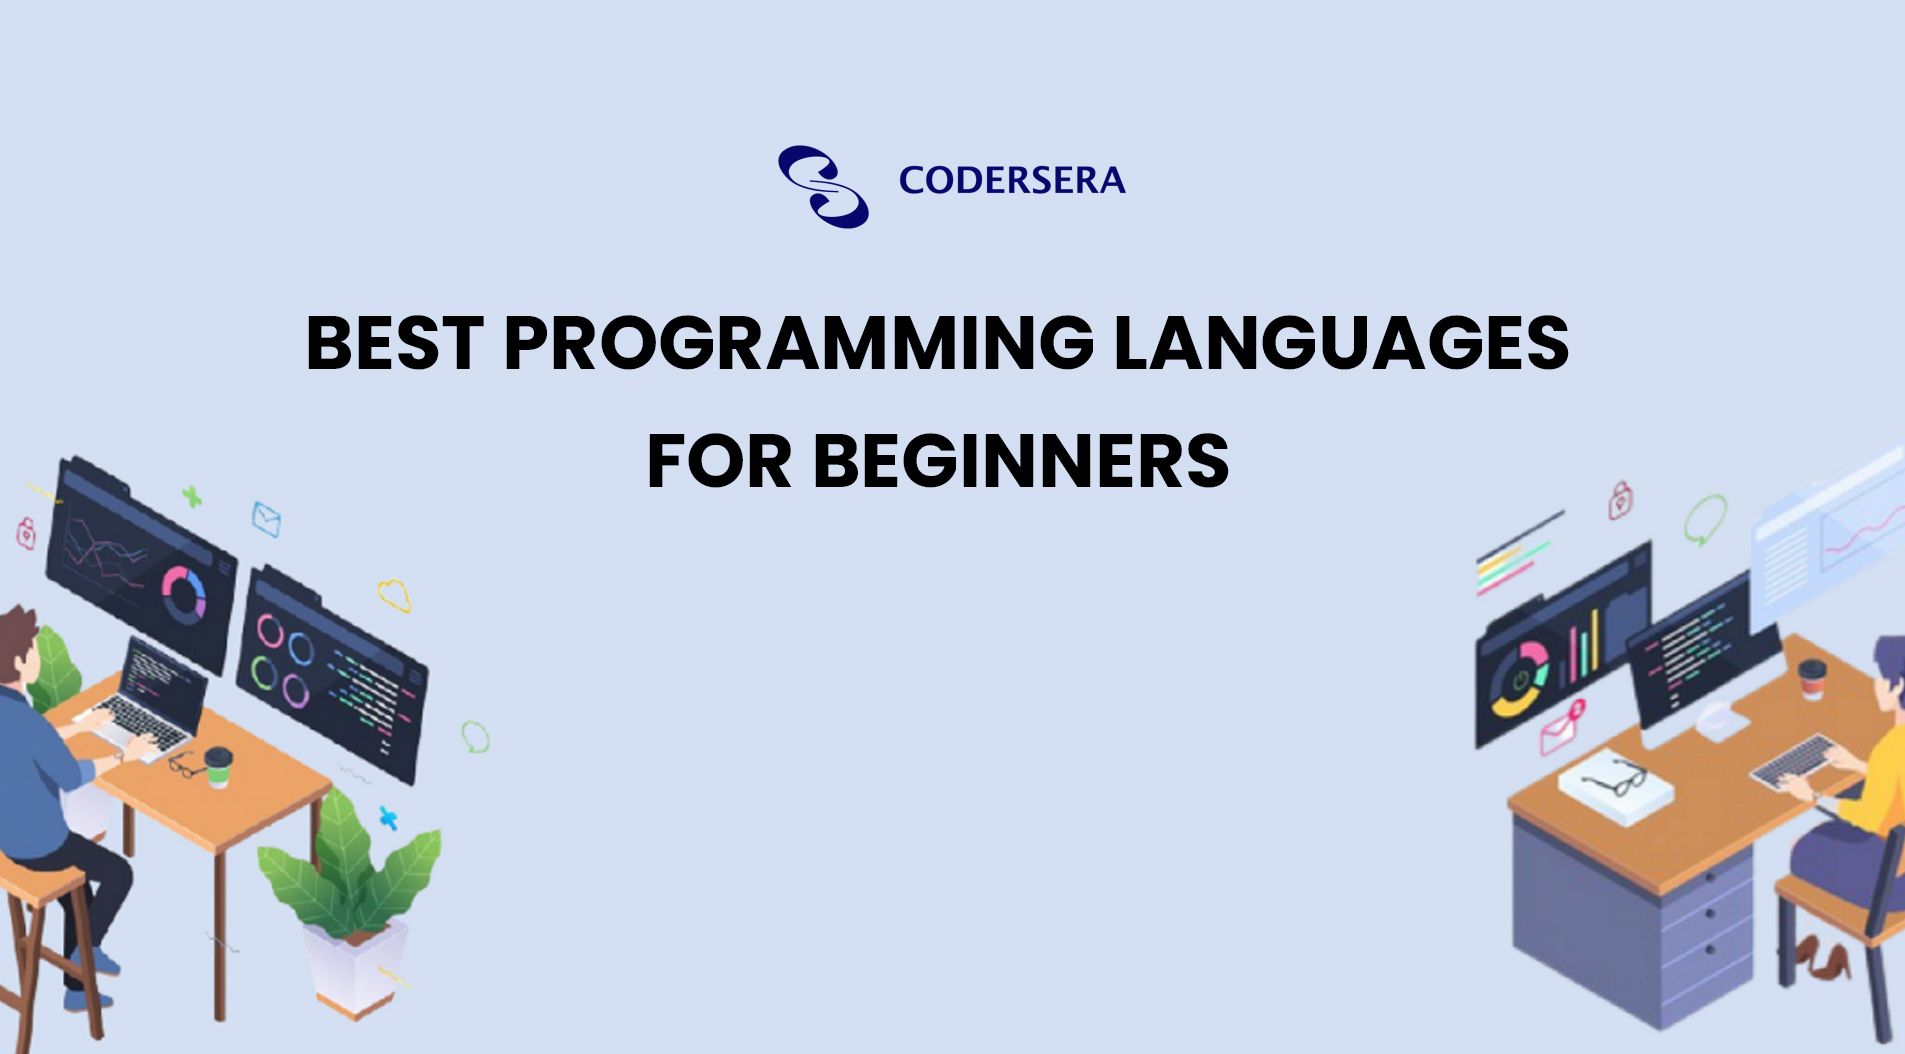 Best Programming Languages for Beginners